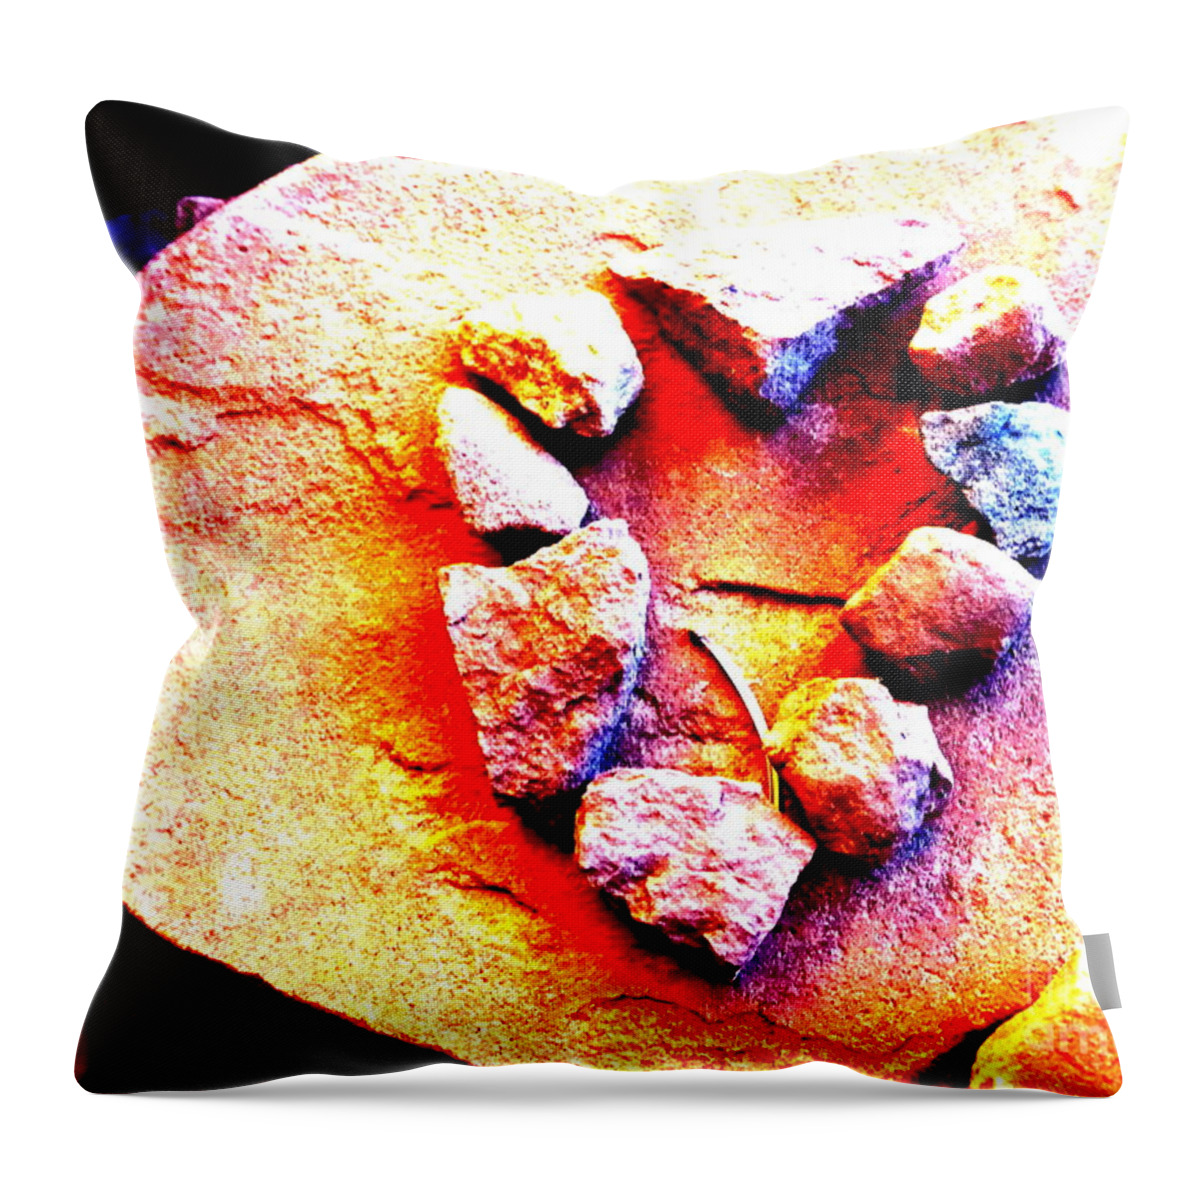 Red Rocks Throw Pillow featuring the photograph Vortex Heart Red Rocks by Mars Besso